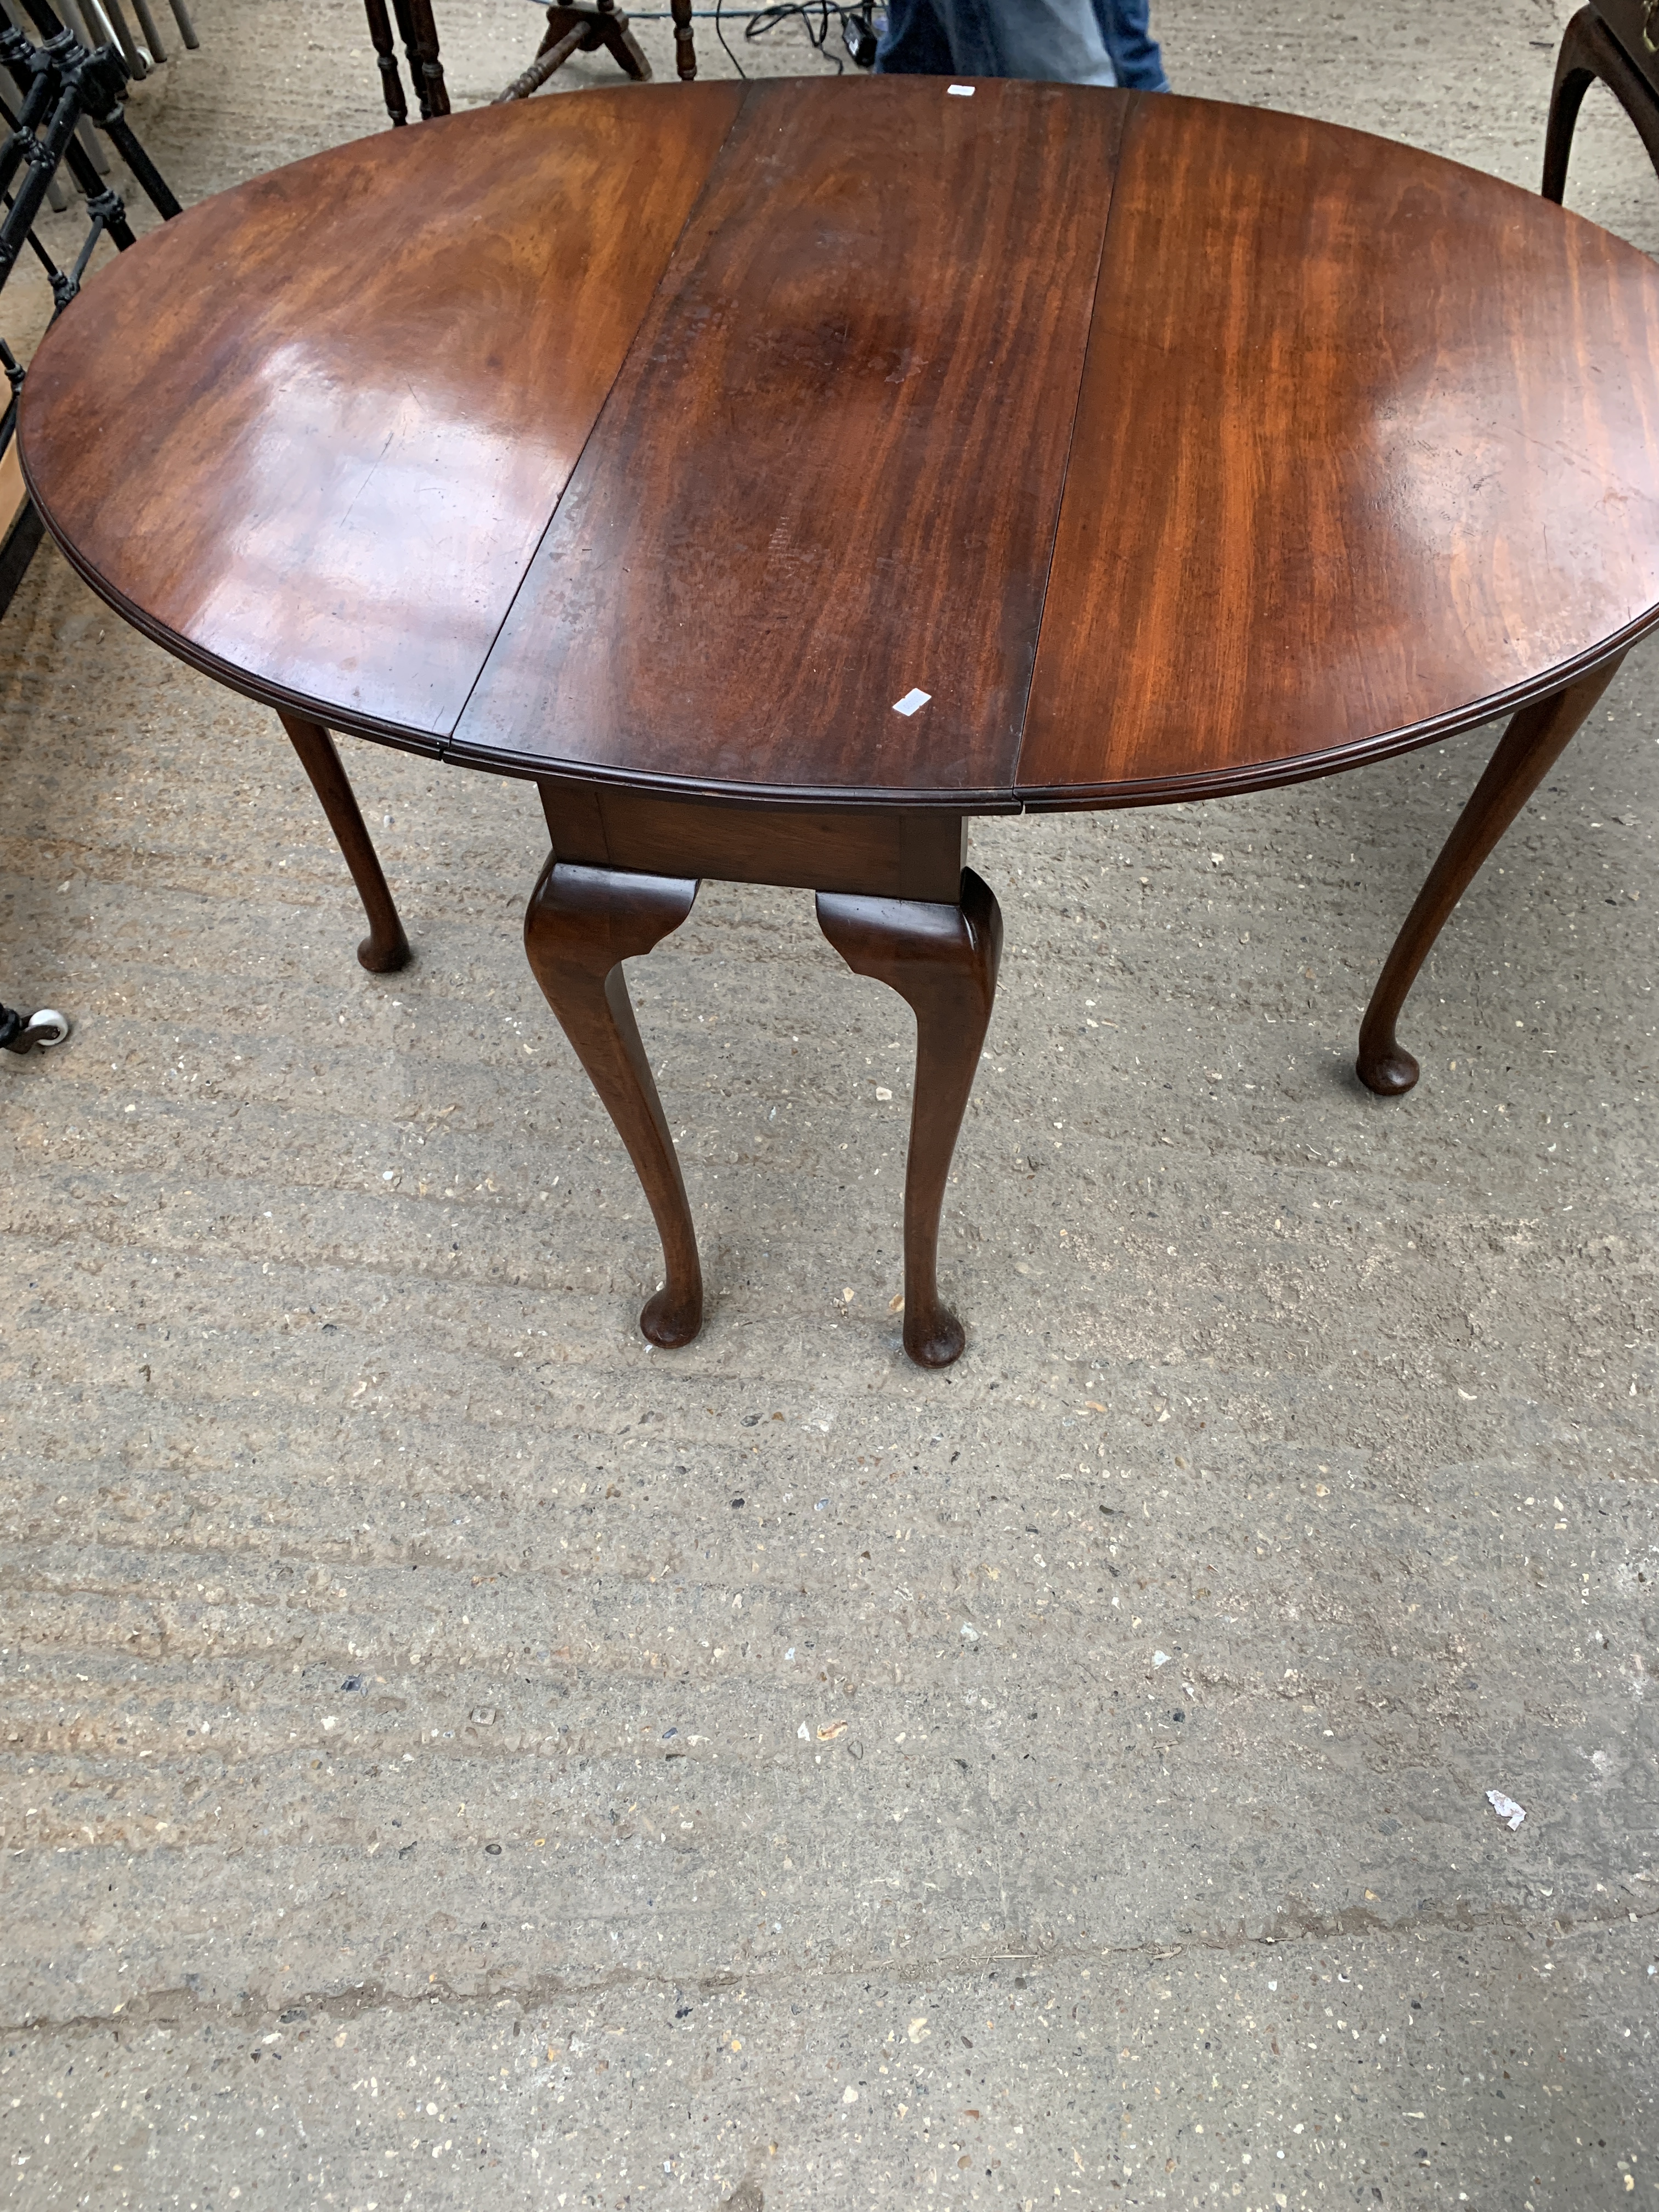 Mahogany gate leg drop side oval table on cabriole legs, with two additional larger leaves